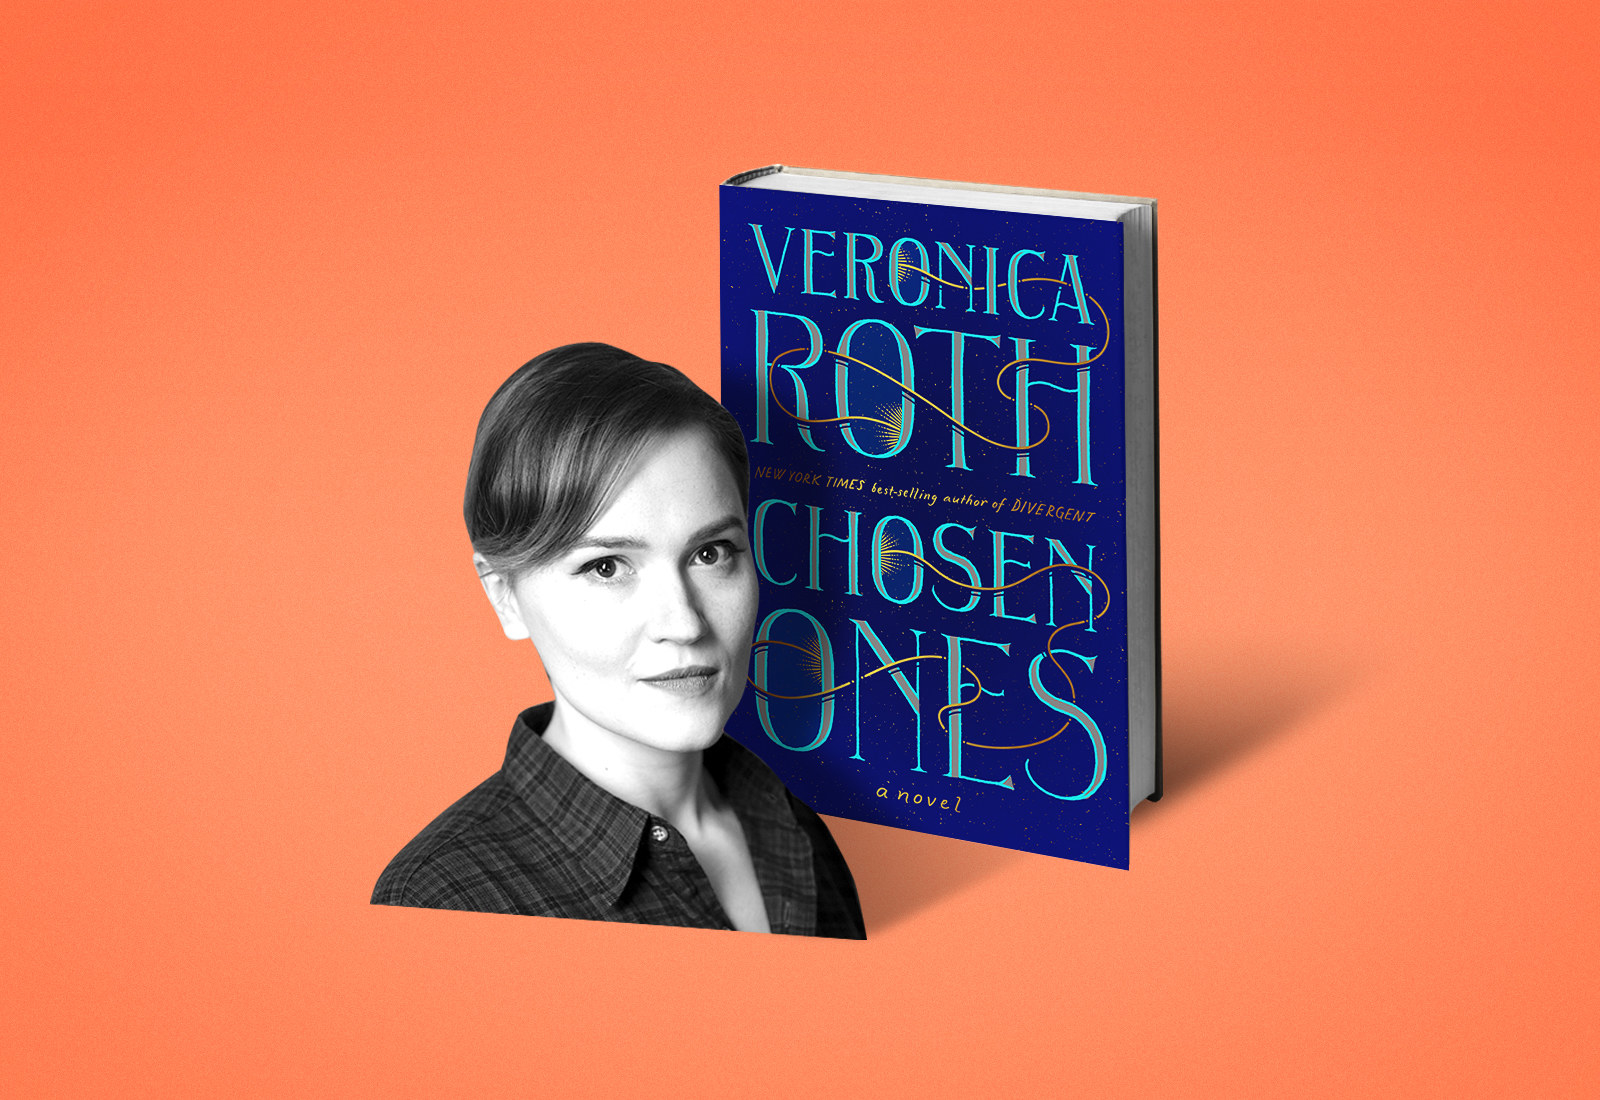 Chosen Ones' book review: Veronica Roth's first adult novel doesn